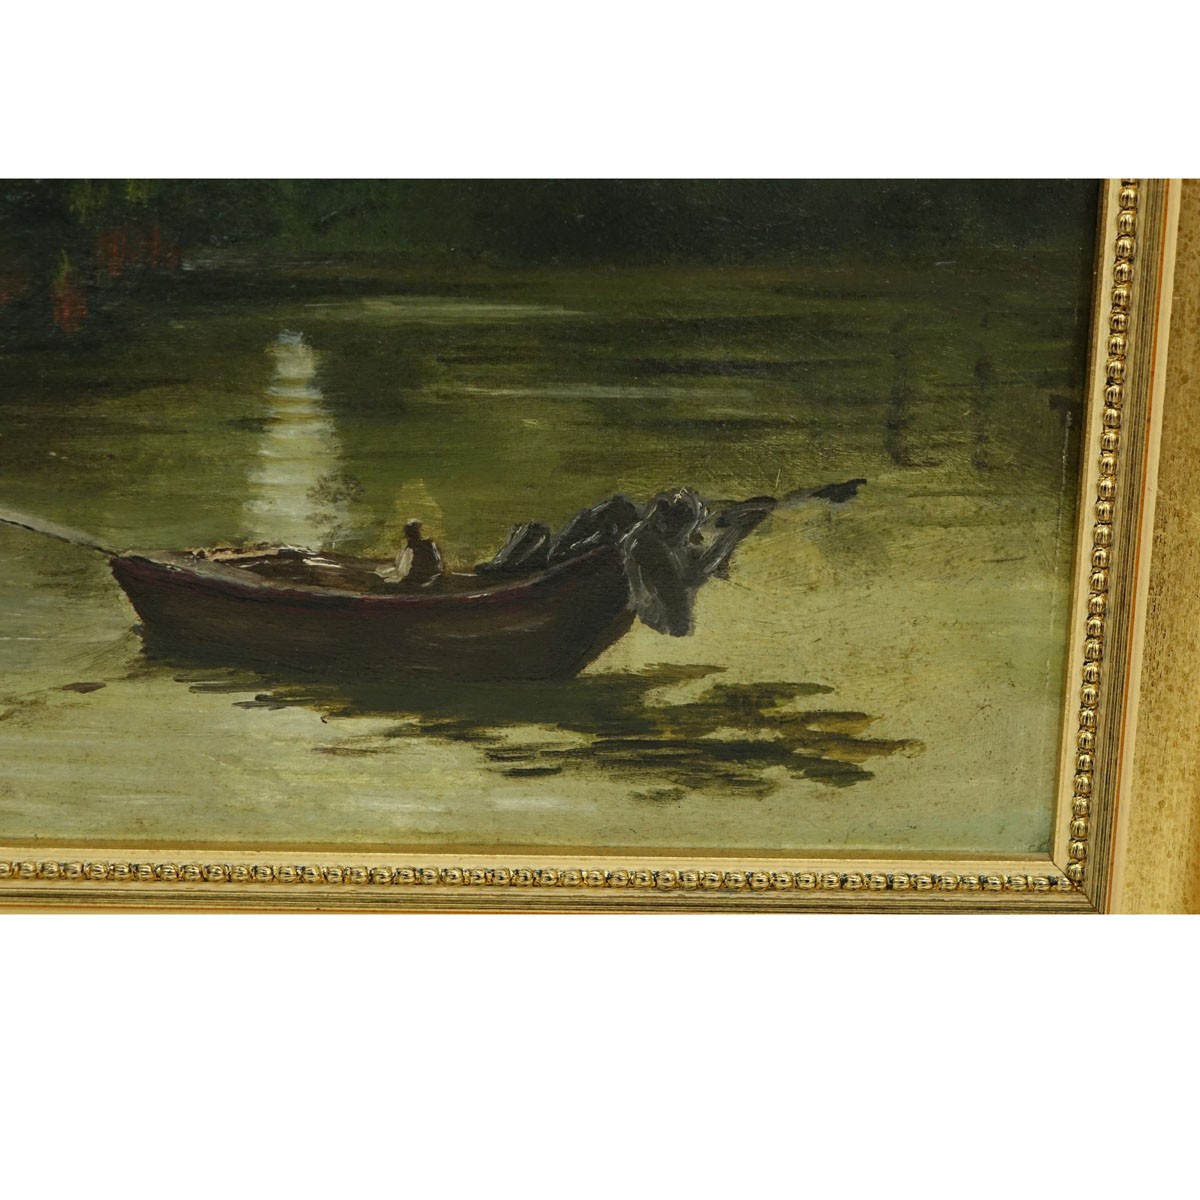 19/20th Century Egyptian School Oil on Board, Paddle Boat in Open Water, Unsigned. Some spotting, small scuffs line.